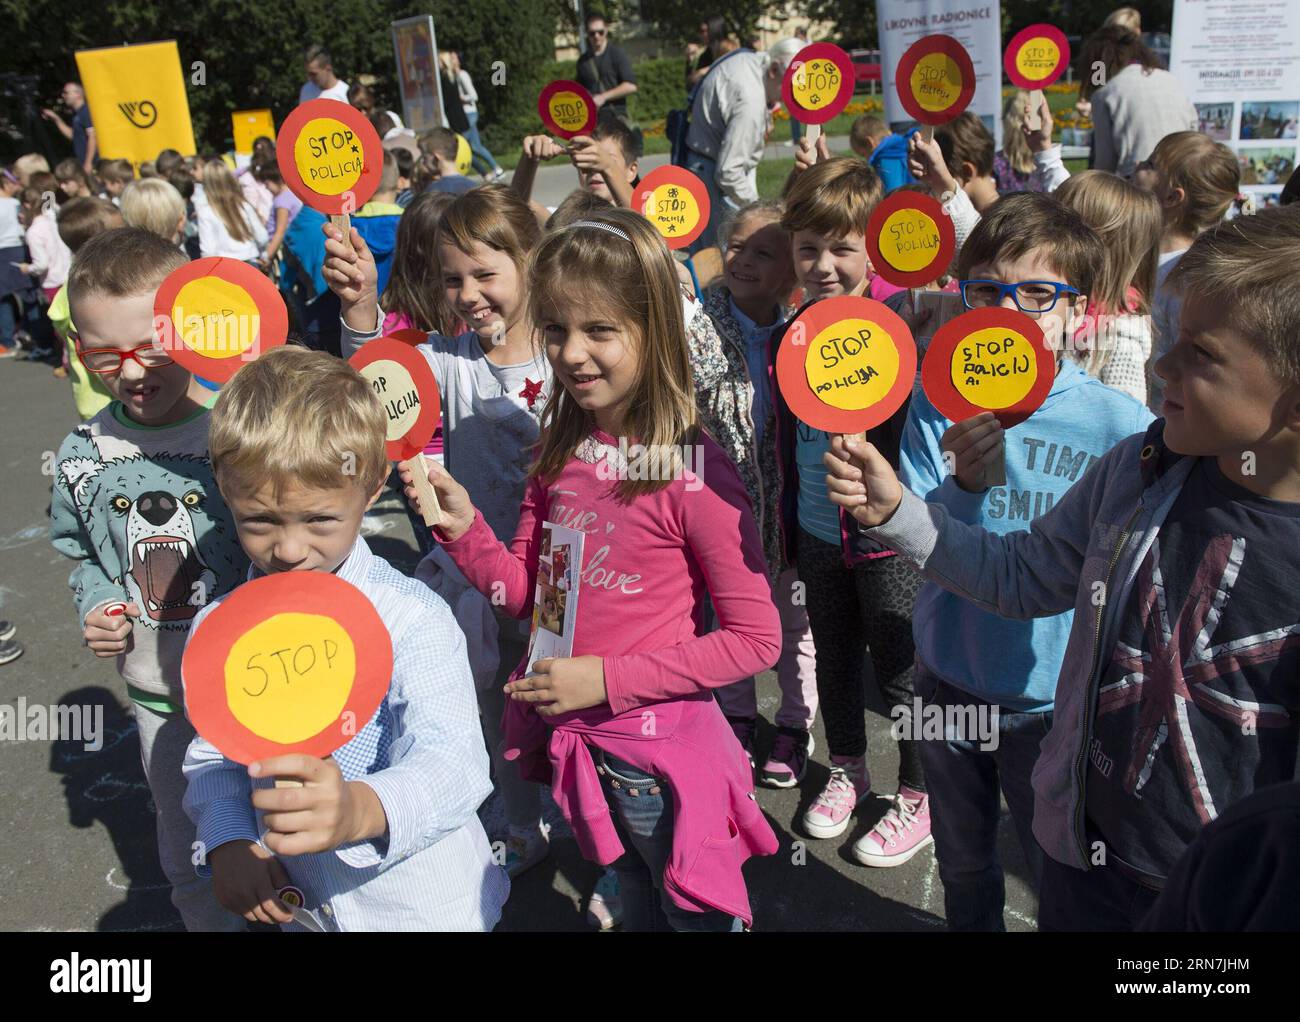 ZAGREB, Sept. 09, 2015 -- Kids participate in a traffic safety program event at Marshal Tito Square in Zagreb, capital of Croatia, Sept. 9, 2015. Local authorities and Police Department organized similar events in all major cities around Croatia to communicate important road safety messages to kids and drivers as new school year kicked-off here on Monday. ) (zjy) CROATIA-ZAGREB-ROAD SAFETY PROGRAM MisoxLisanin PUBLICATIONxNOTxINxCHN   Zagreb Sept 09 2015 Kids participate in a Traffic Safety Program Event AT Marshal Tito Square in Zagreb Capital of Croatia Sept 9 2015 Local Authorities and Poli Stock Photo